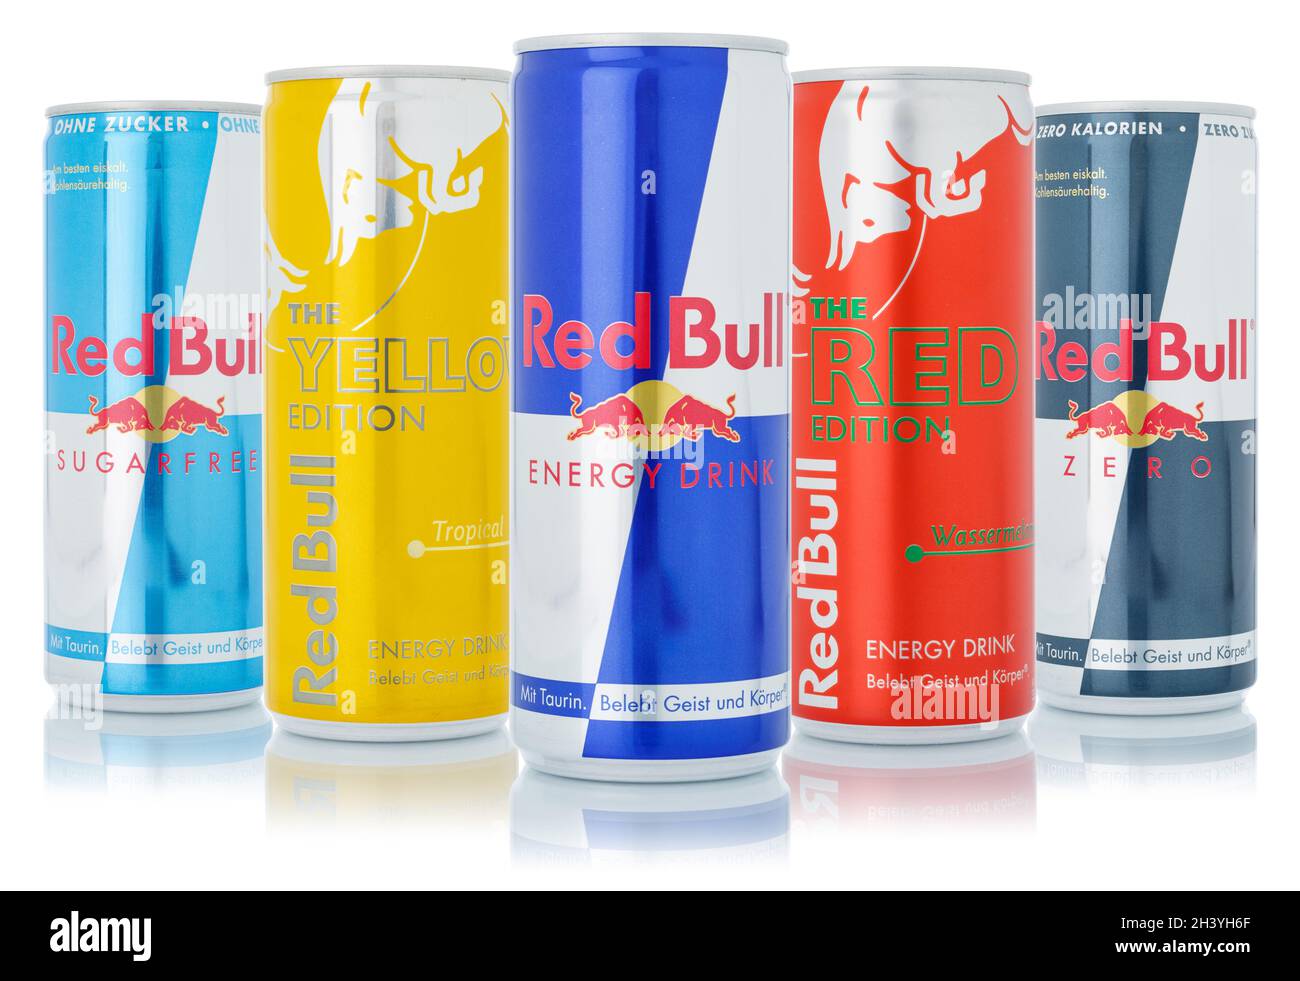 Red Bull Energy Drinks Products Lemonade Soft Drink Drinks in Can Exempt isolated Stock Photo